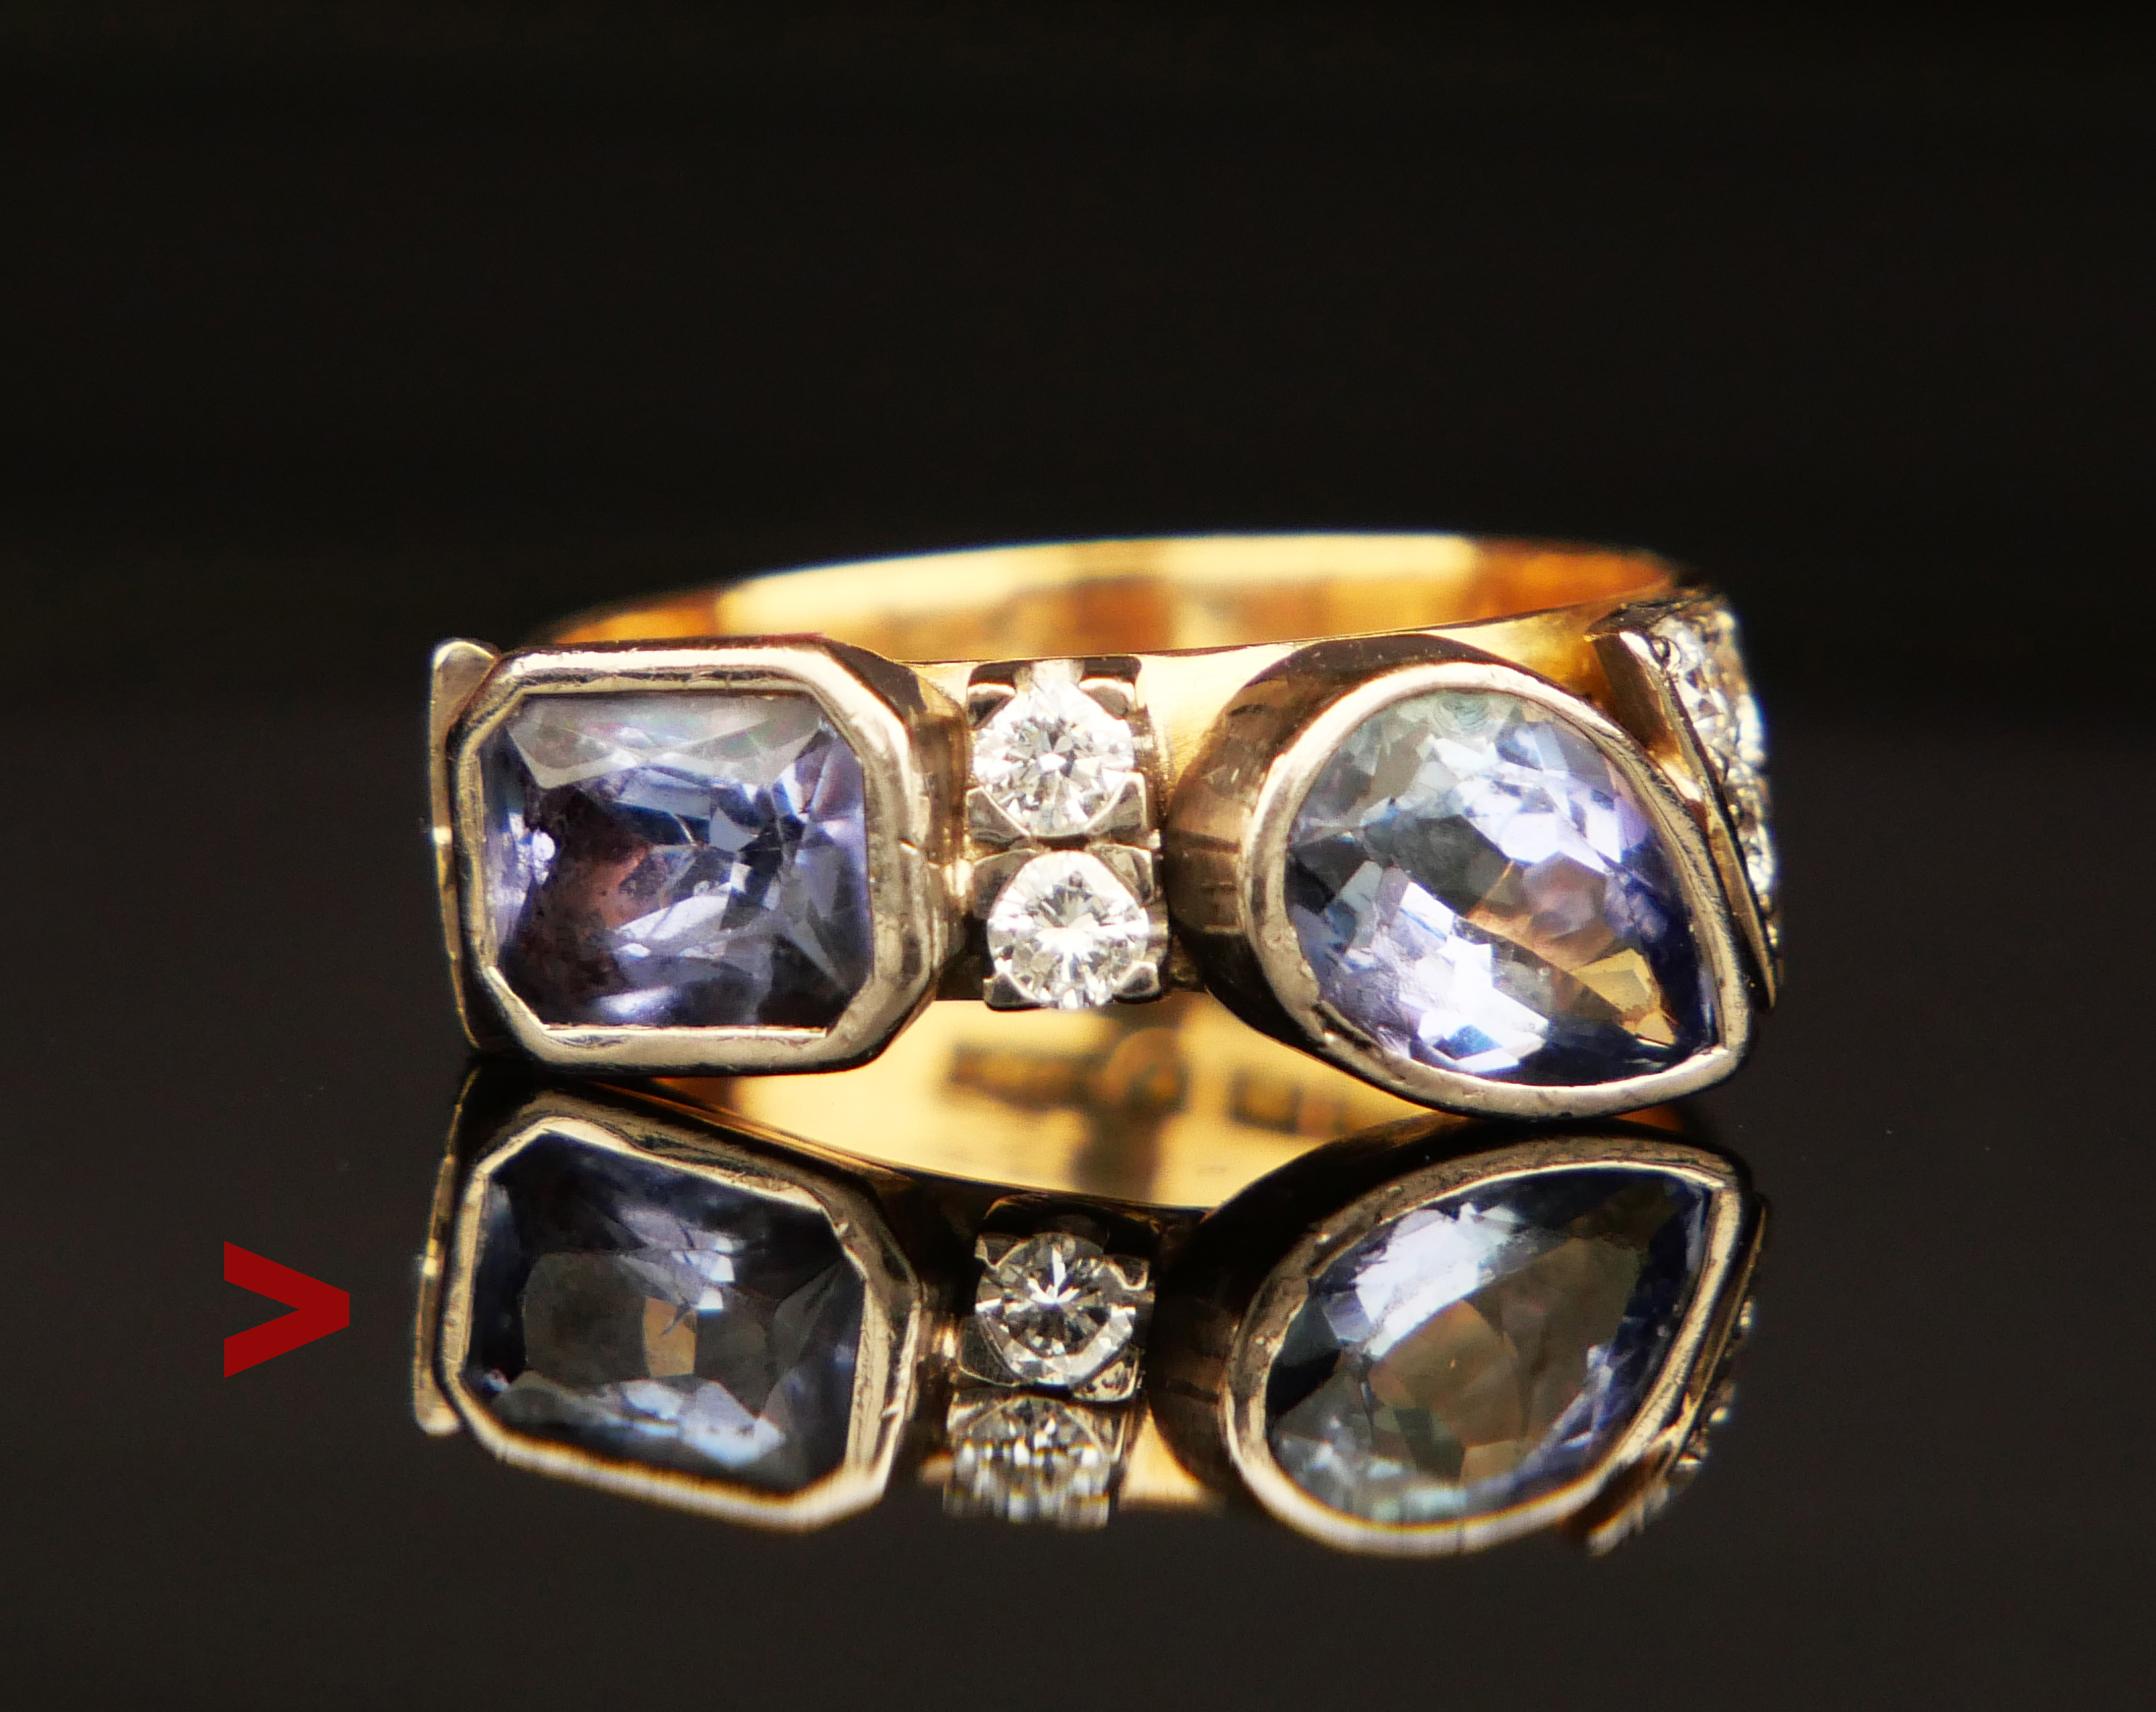 A Ring in solid 18K Gold featuring two natural Tanzanites and 6 Diamonds. Settings in White Gold or Platinum.

Swedish hallmarks, 18K, year combination N11 / made in 2011

Baguette cut Tanzanite 7.75 mm x 5.75 mm x 3.7 mm / ca. 1.3 ct, the second